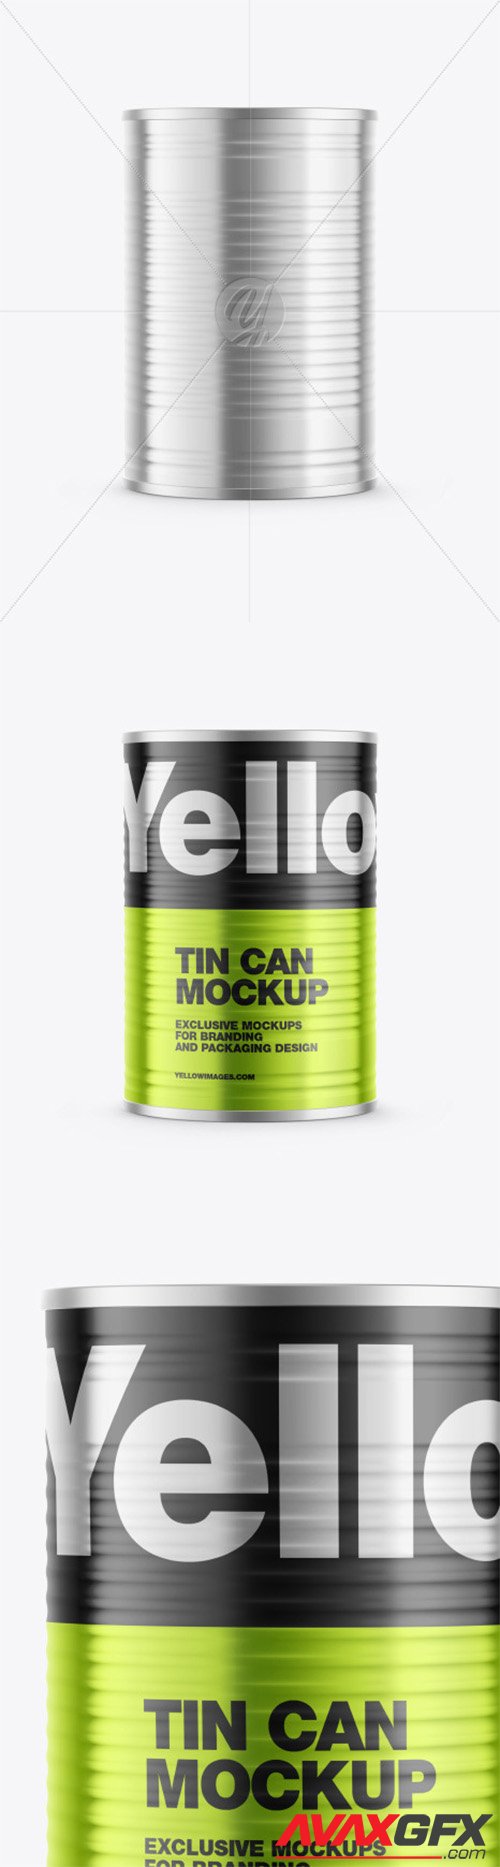 Download 28 Glossy Oil Tin Can Front View Psd Mockup Branding Mockups PSD Mockup Templates